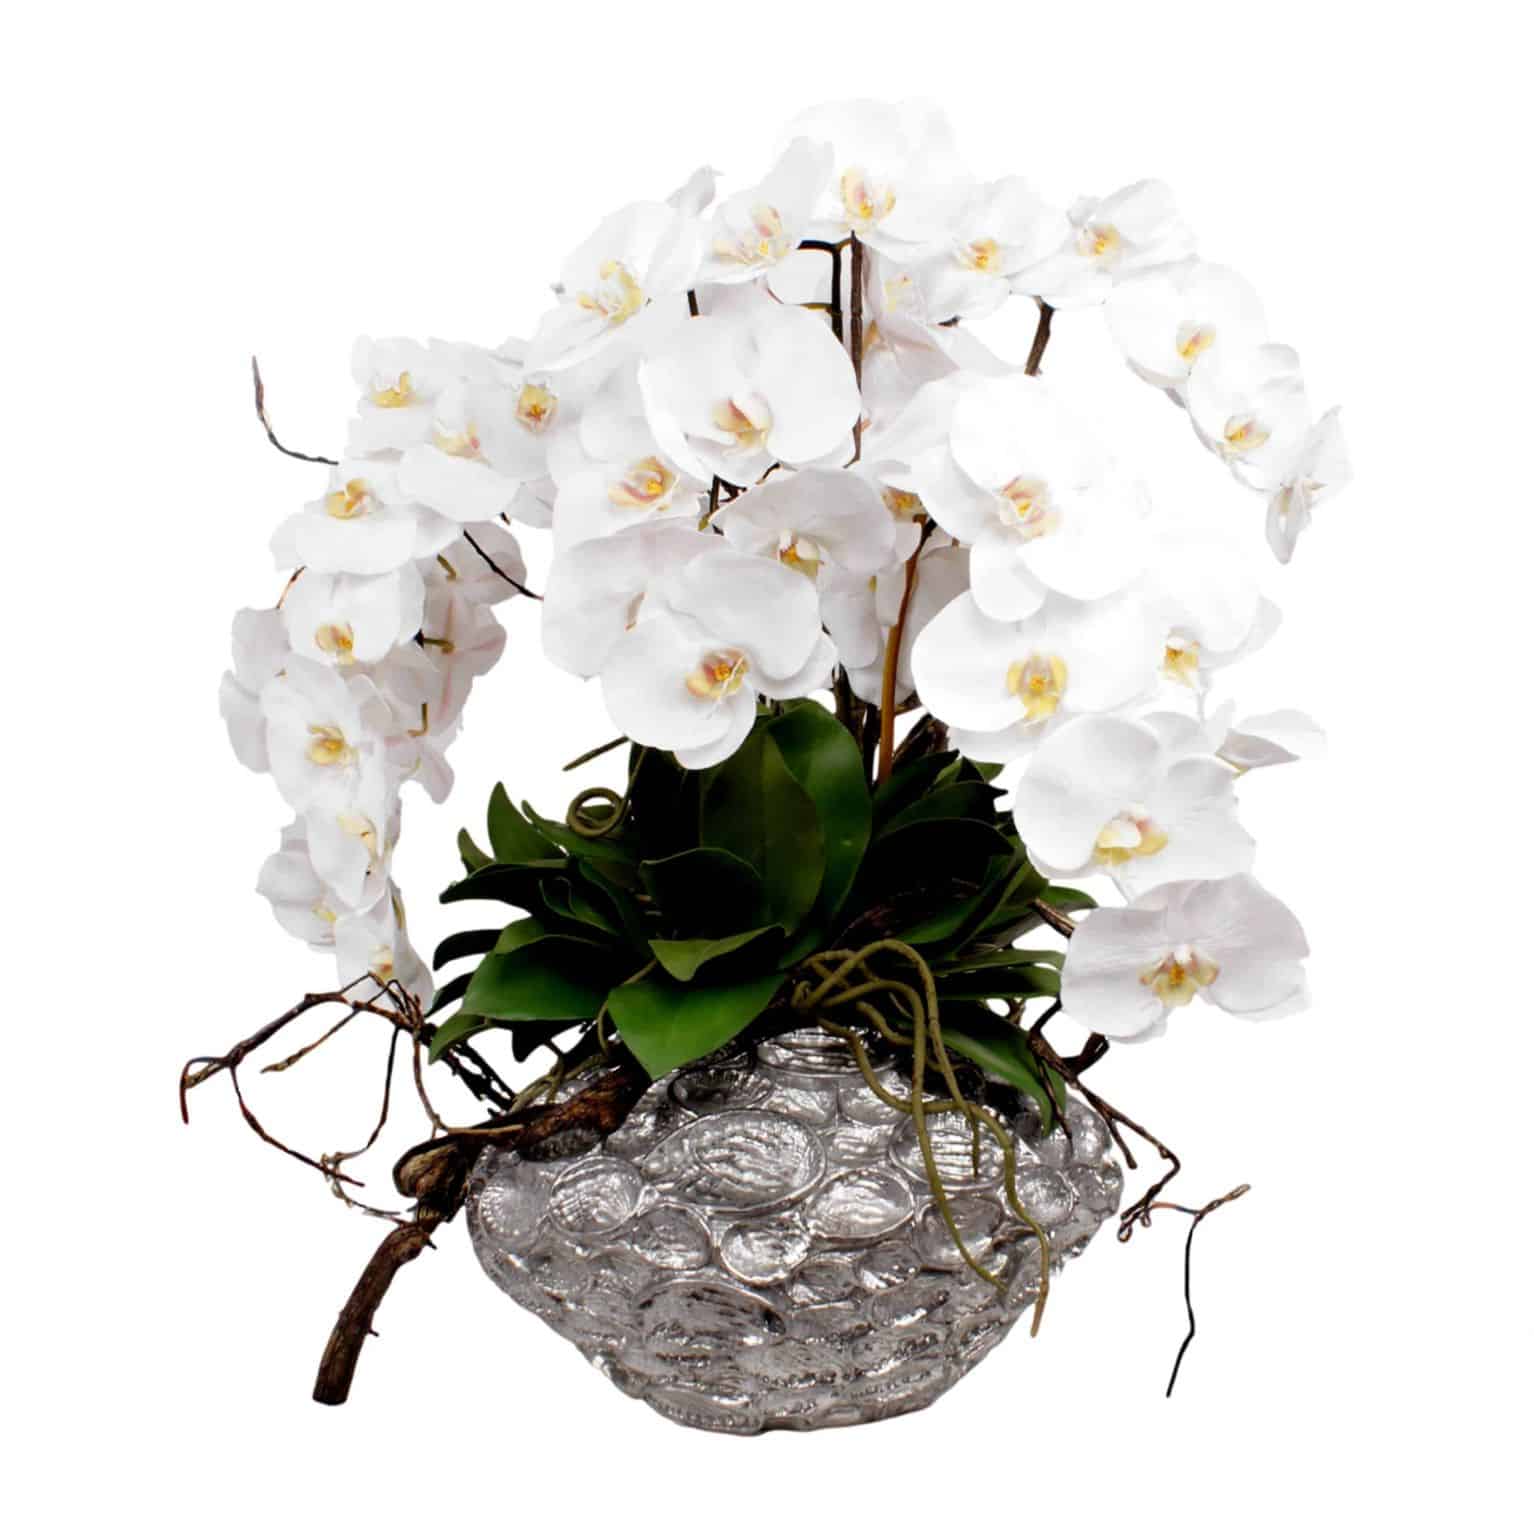 Shop for our large white head phalaenopsis orchid silk flower. Each gorgeous head has a natural look with lifelike detail. Arranged with artificial orchid leaves.